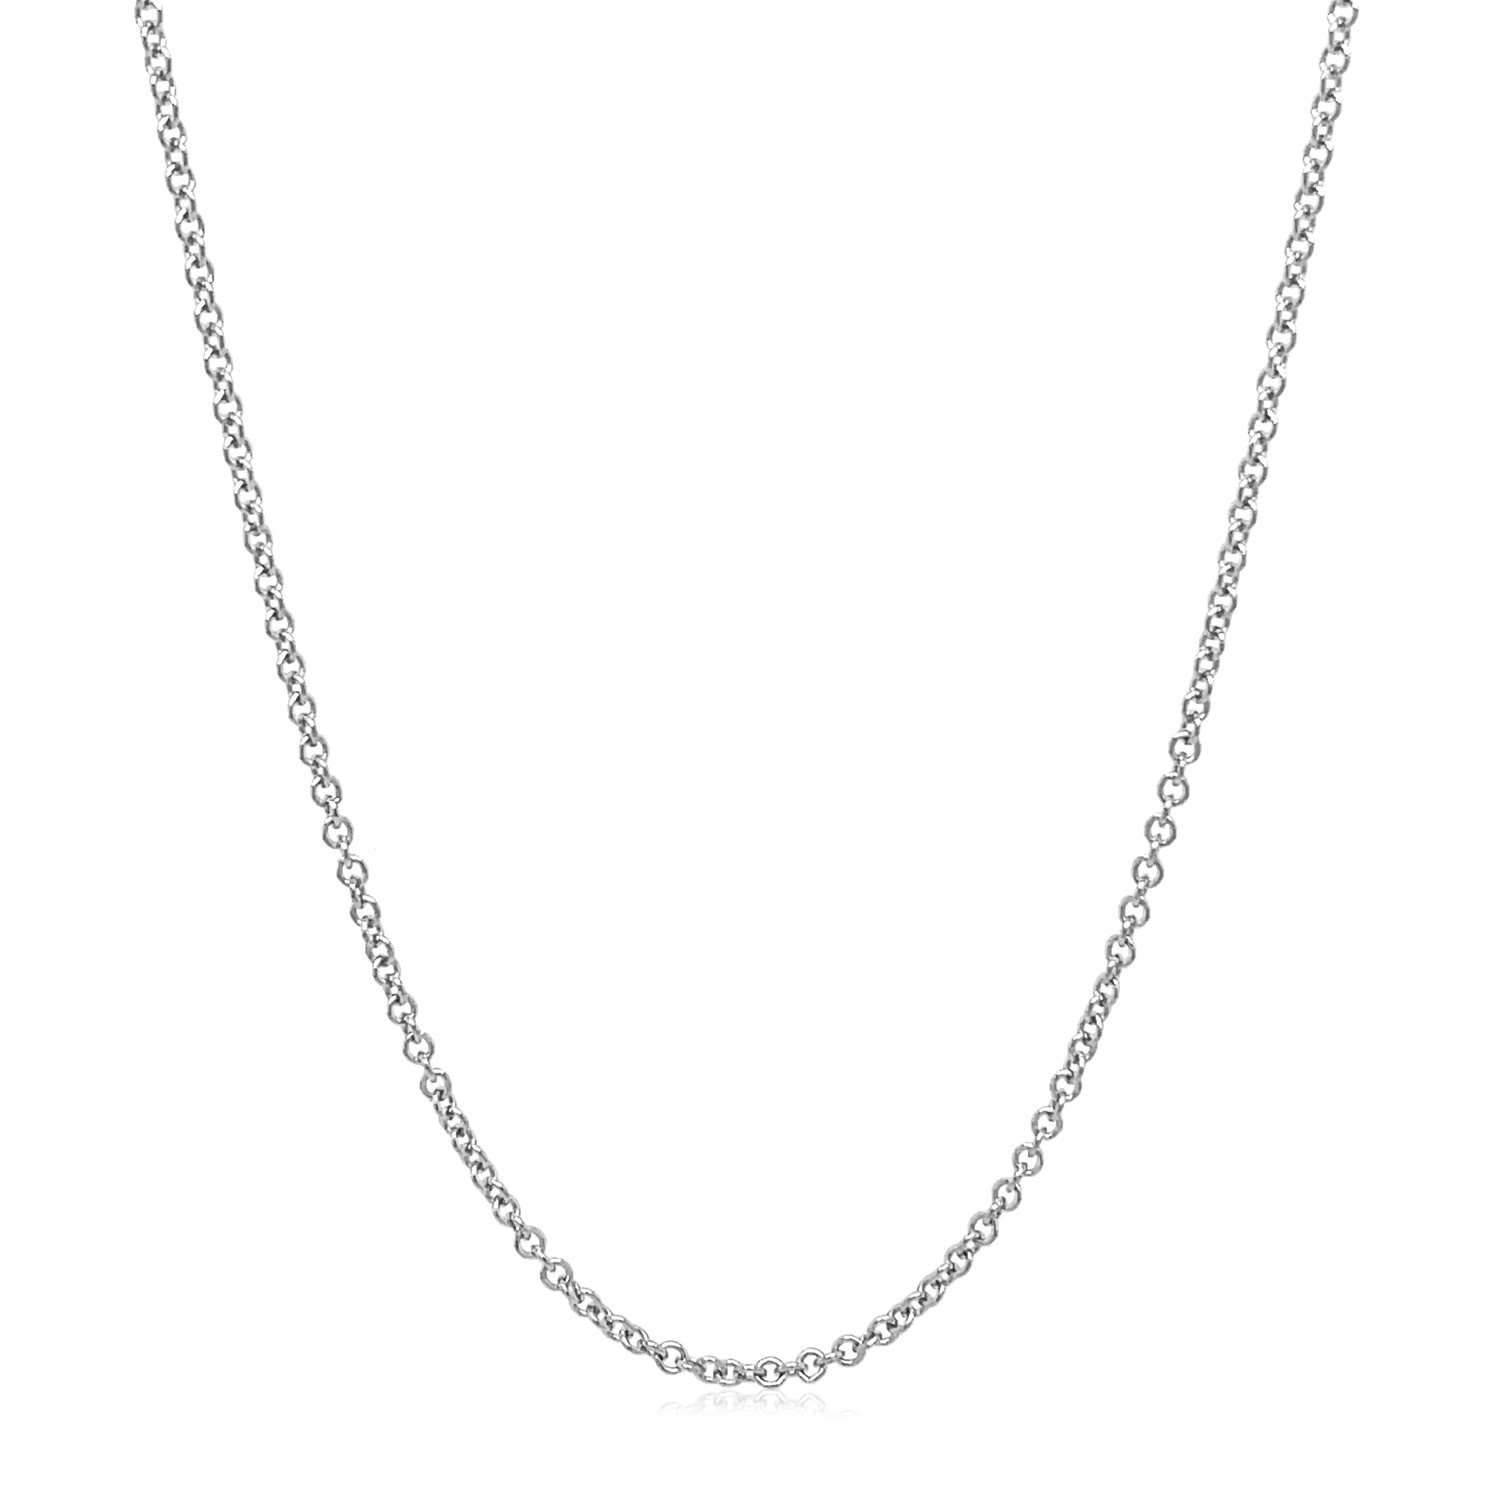 14k White Gold Round Cable Link Chain 1.5mm